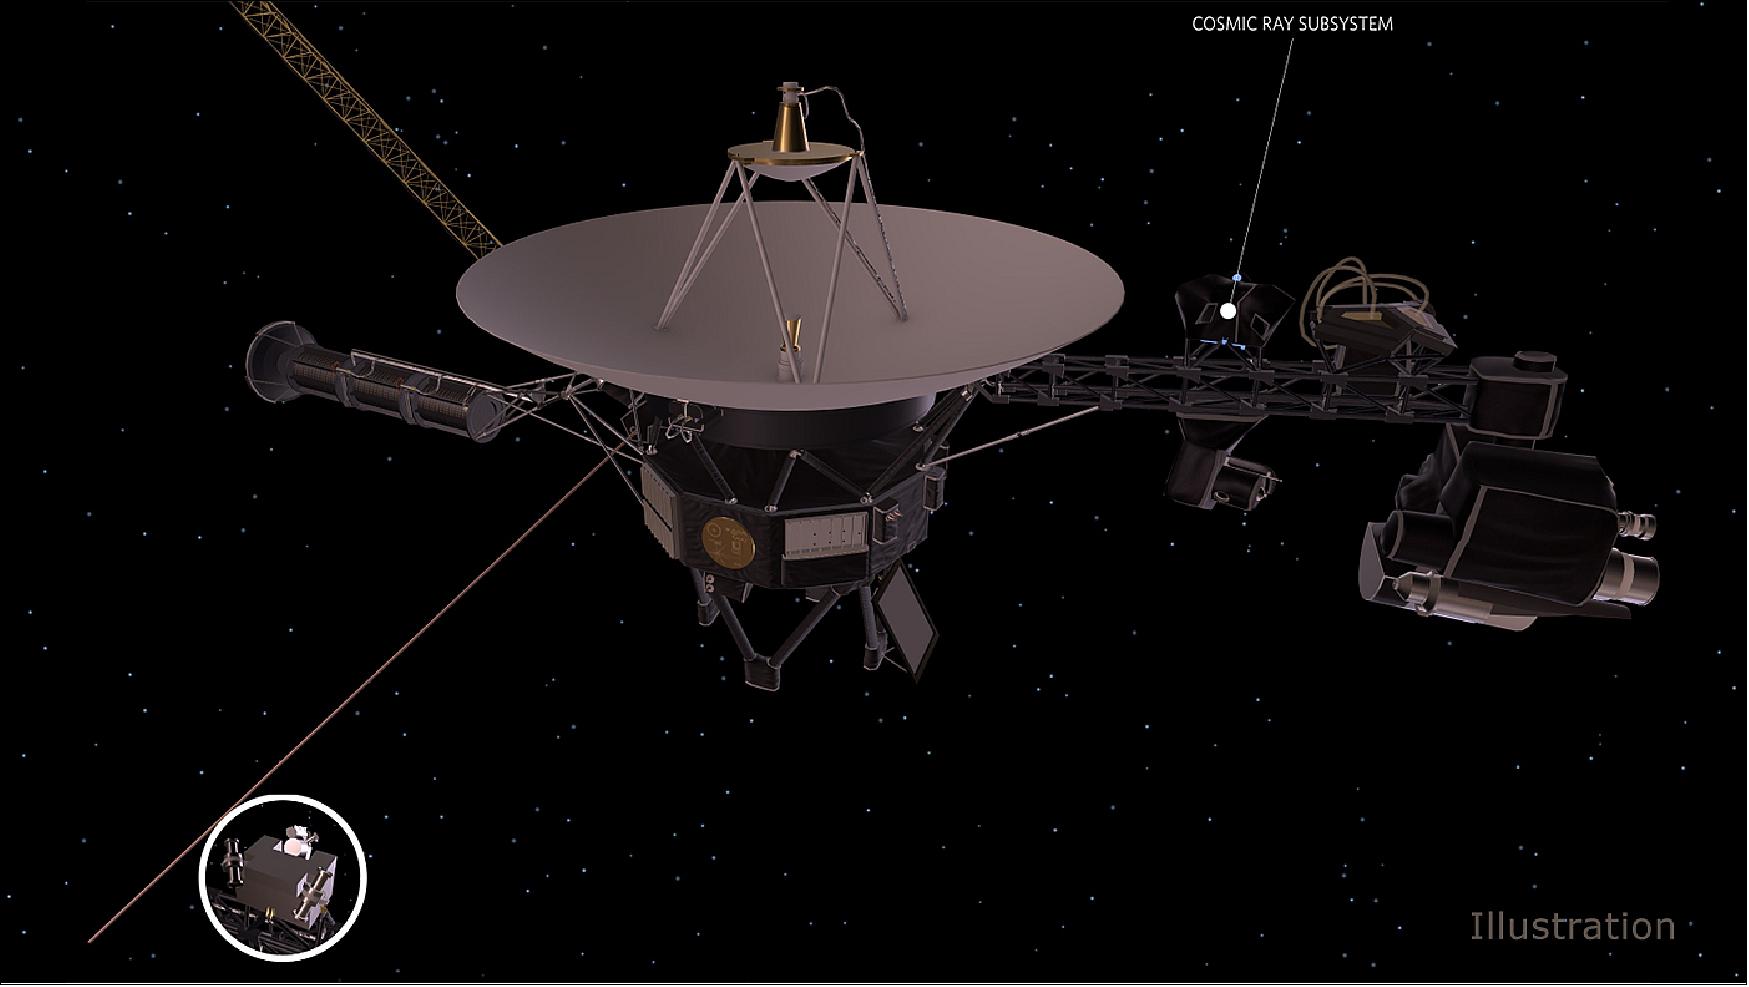 Figure 12: This artist's concept depicts one of NASA's Voyager spacecraft, including the location of the CRS (Cosmic Ray Subsystem) instrument. Both Voyagers launched with operating CRS instruments (image credit: NASA/JPL-Caltech)